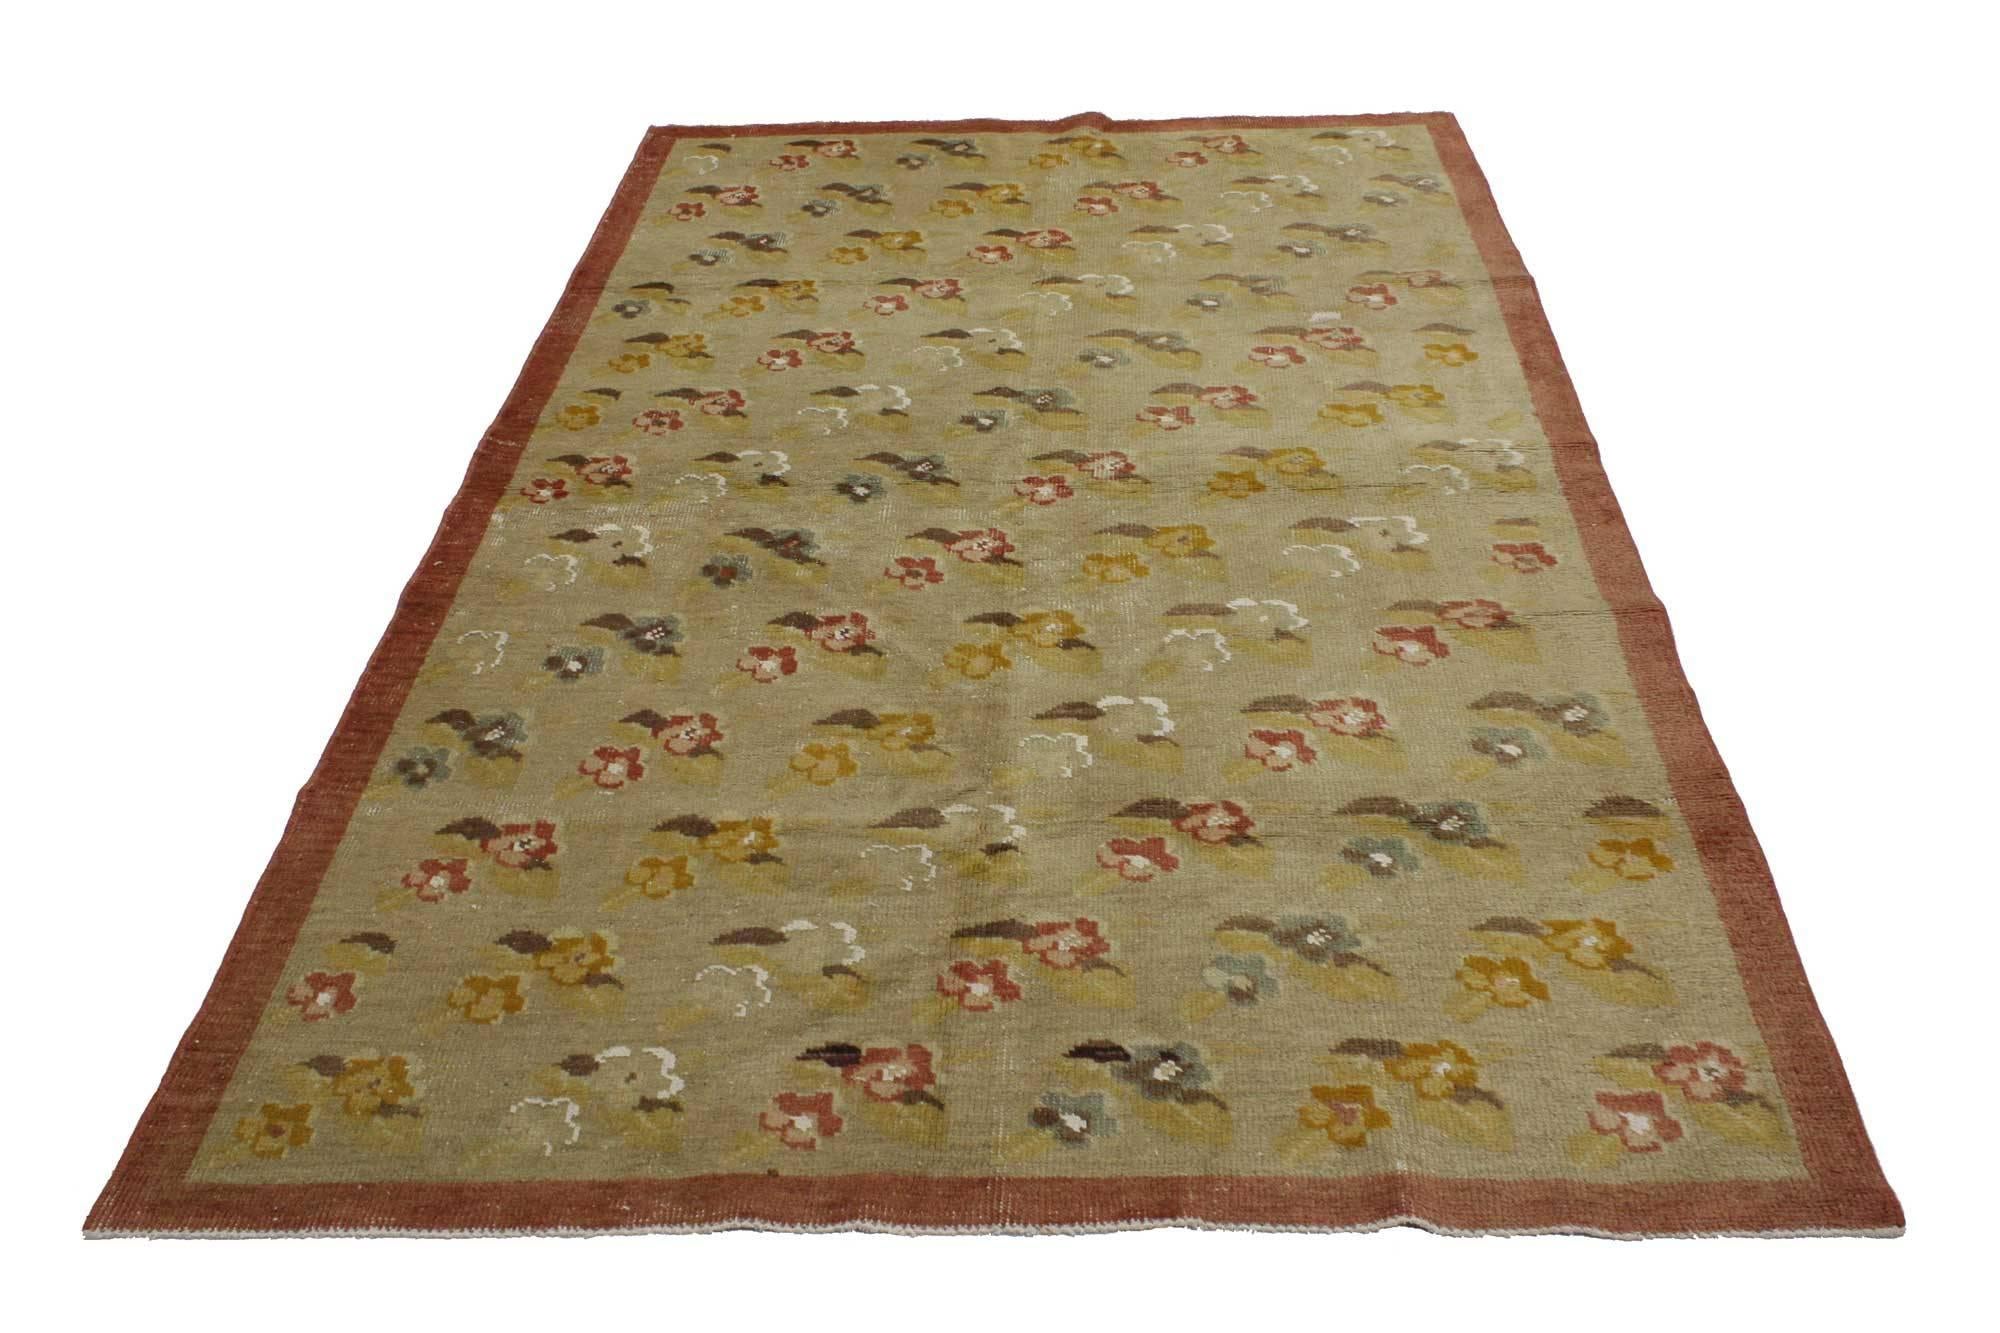 51703,  Vintage Turkish Oushak Rug with English Country or Swedish Farmhouse Style,  04'07 x 07'04. This charming vintage Oushak rug with Farmhouse style features an ecru field of blossoms organized in diagonal rows of terra cotta, burnt orange,